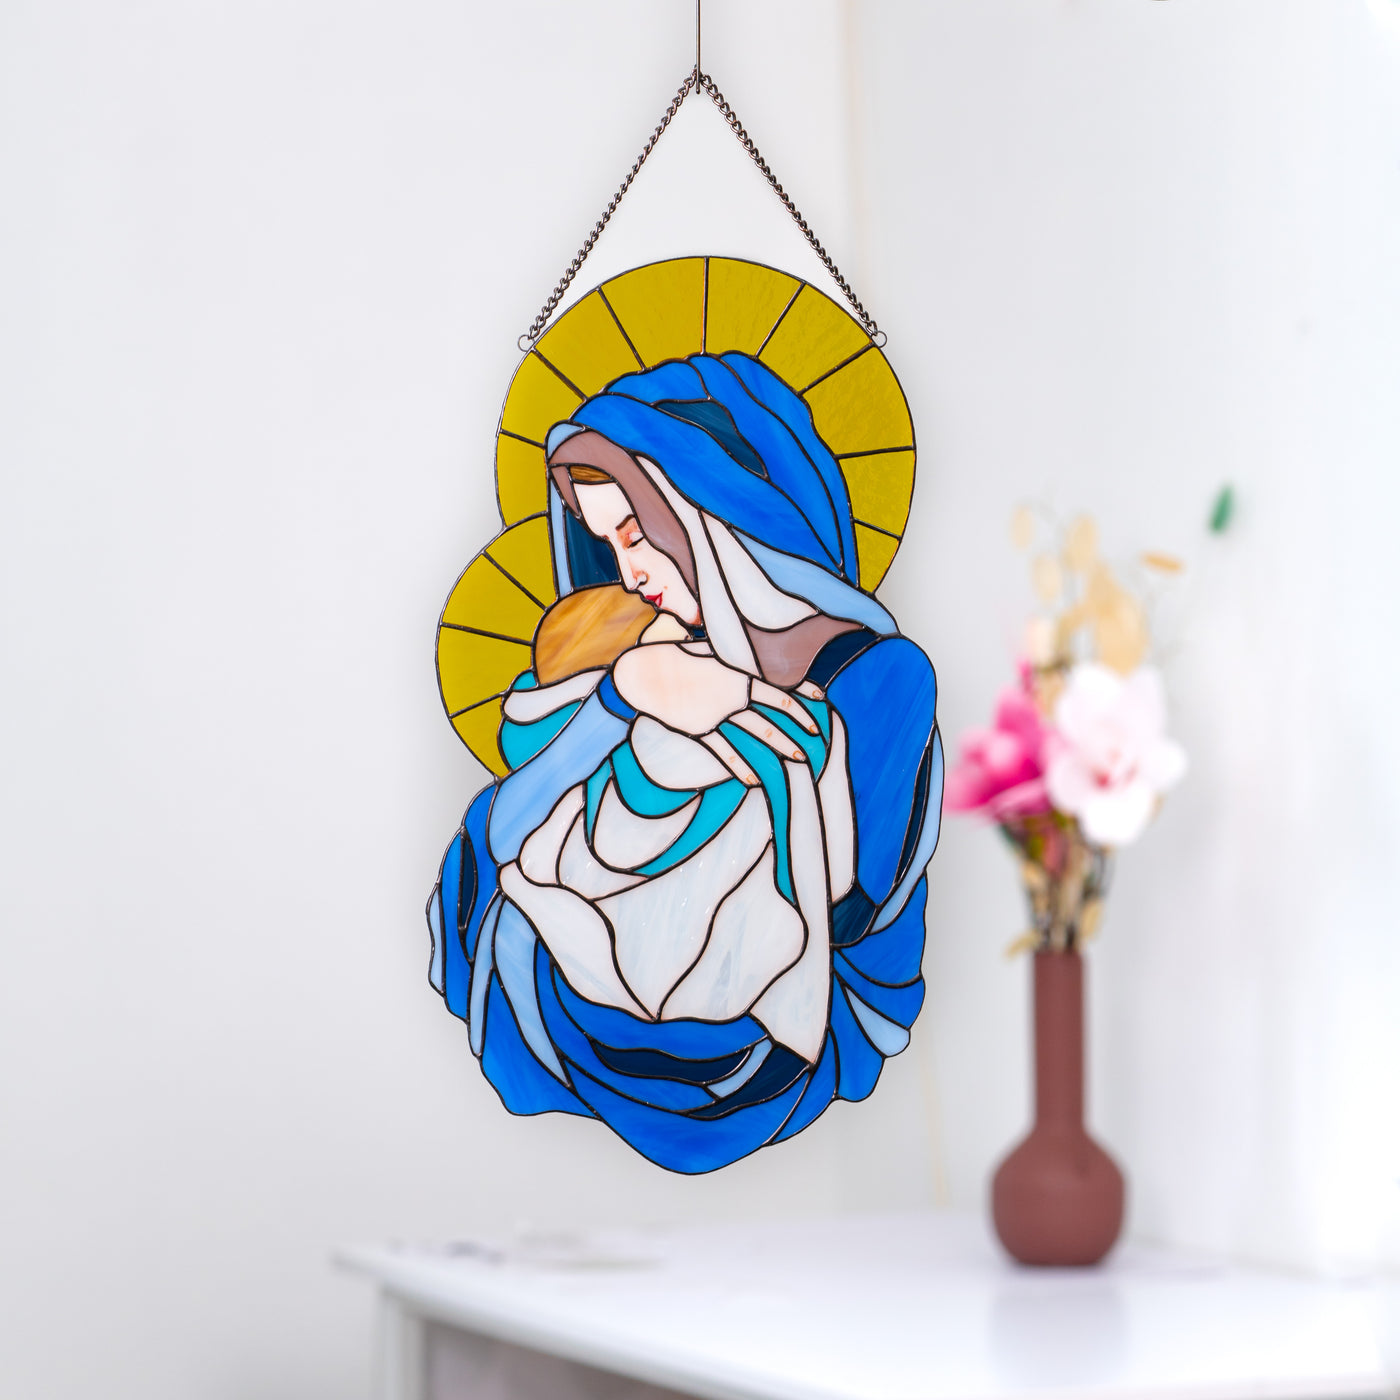 Stained glass window panel of Virgin Mary with Jesus Christ coloured like Ukrainian flag